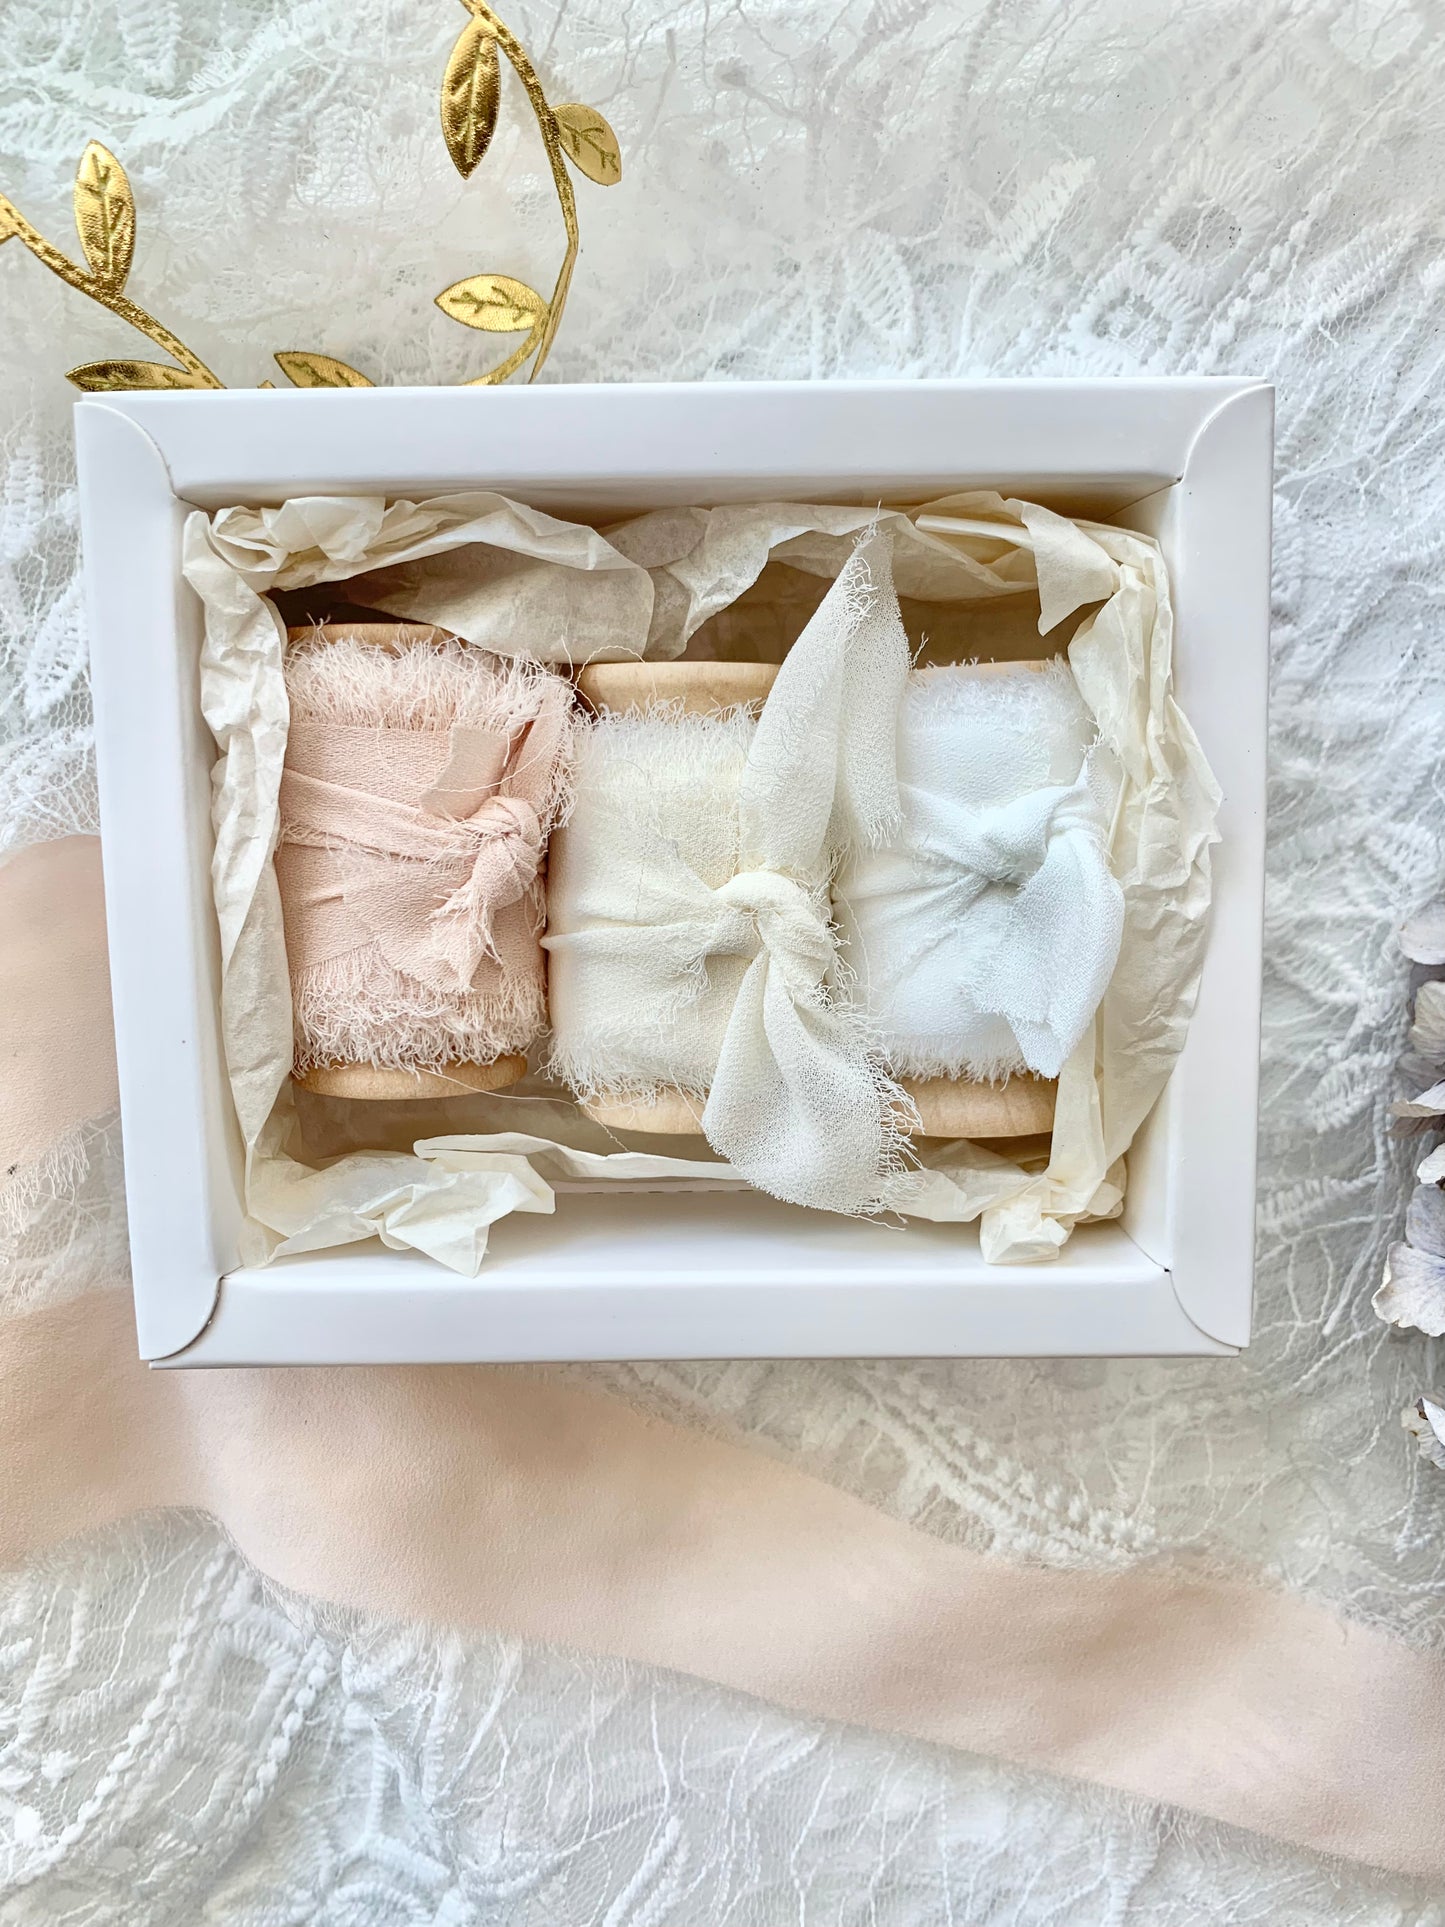 Chiffon Silk Ribbons | 3 Rolls with Wood Spool in Box | Journaling Accessories